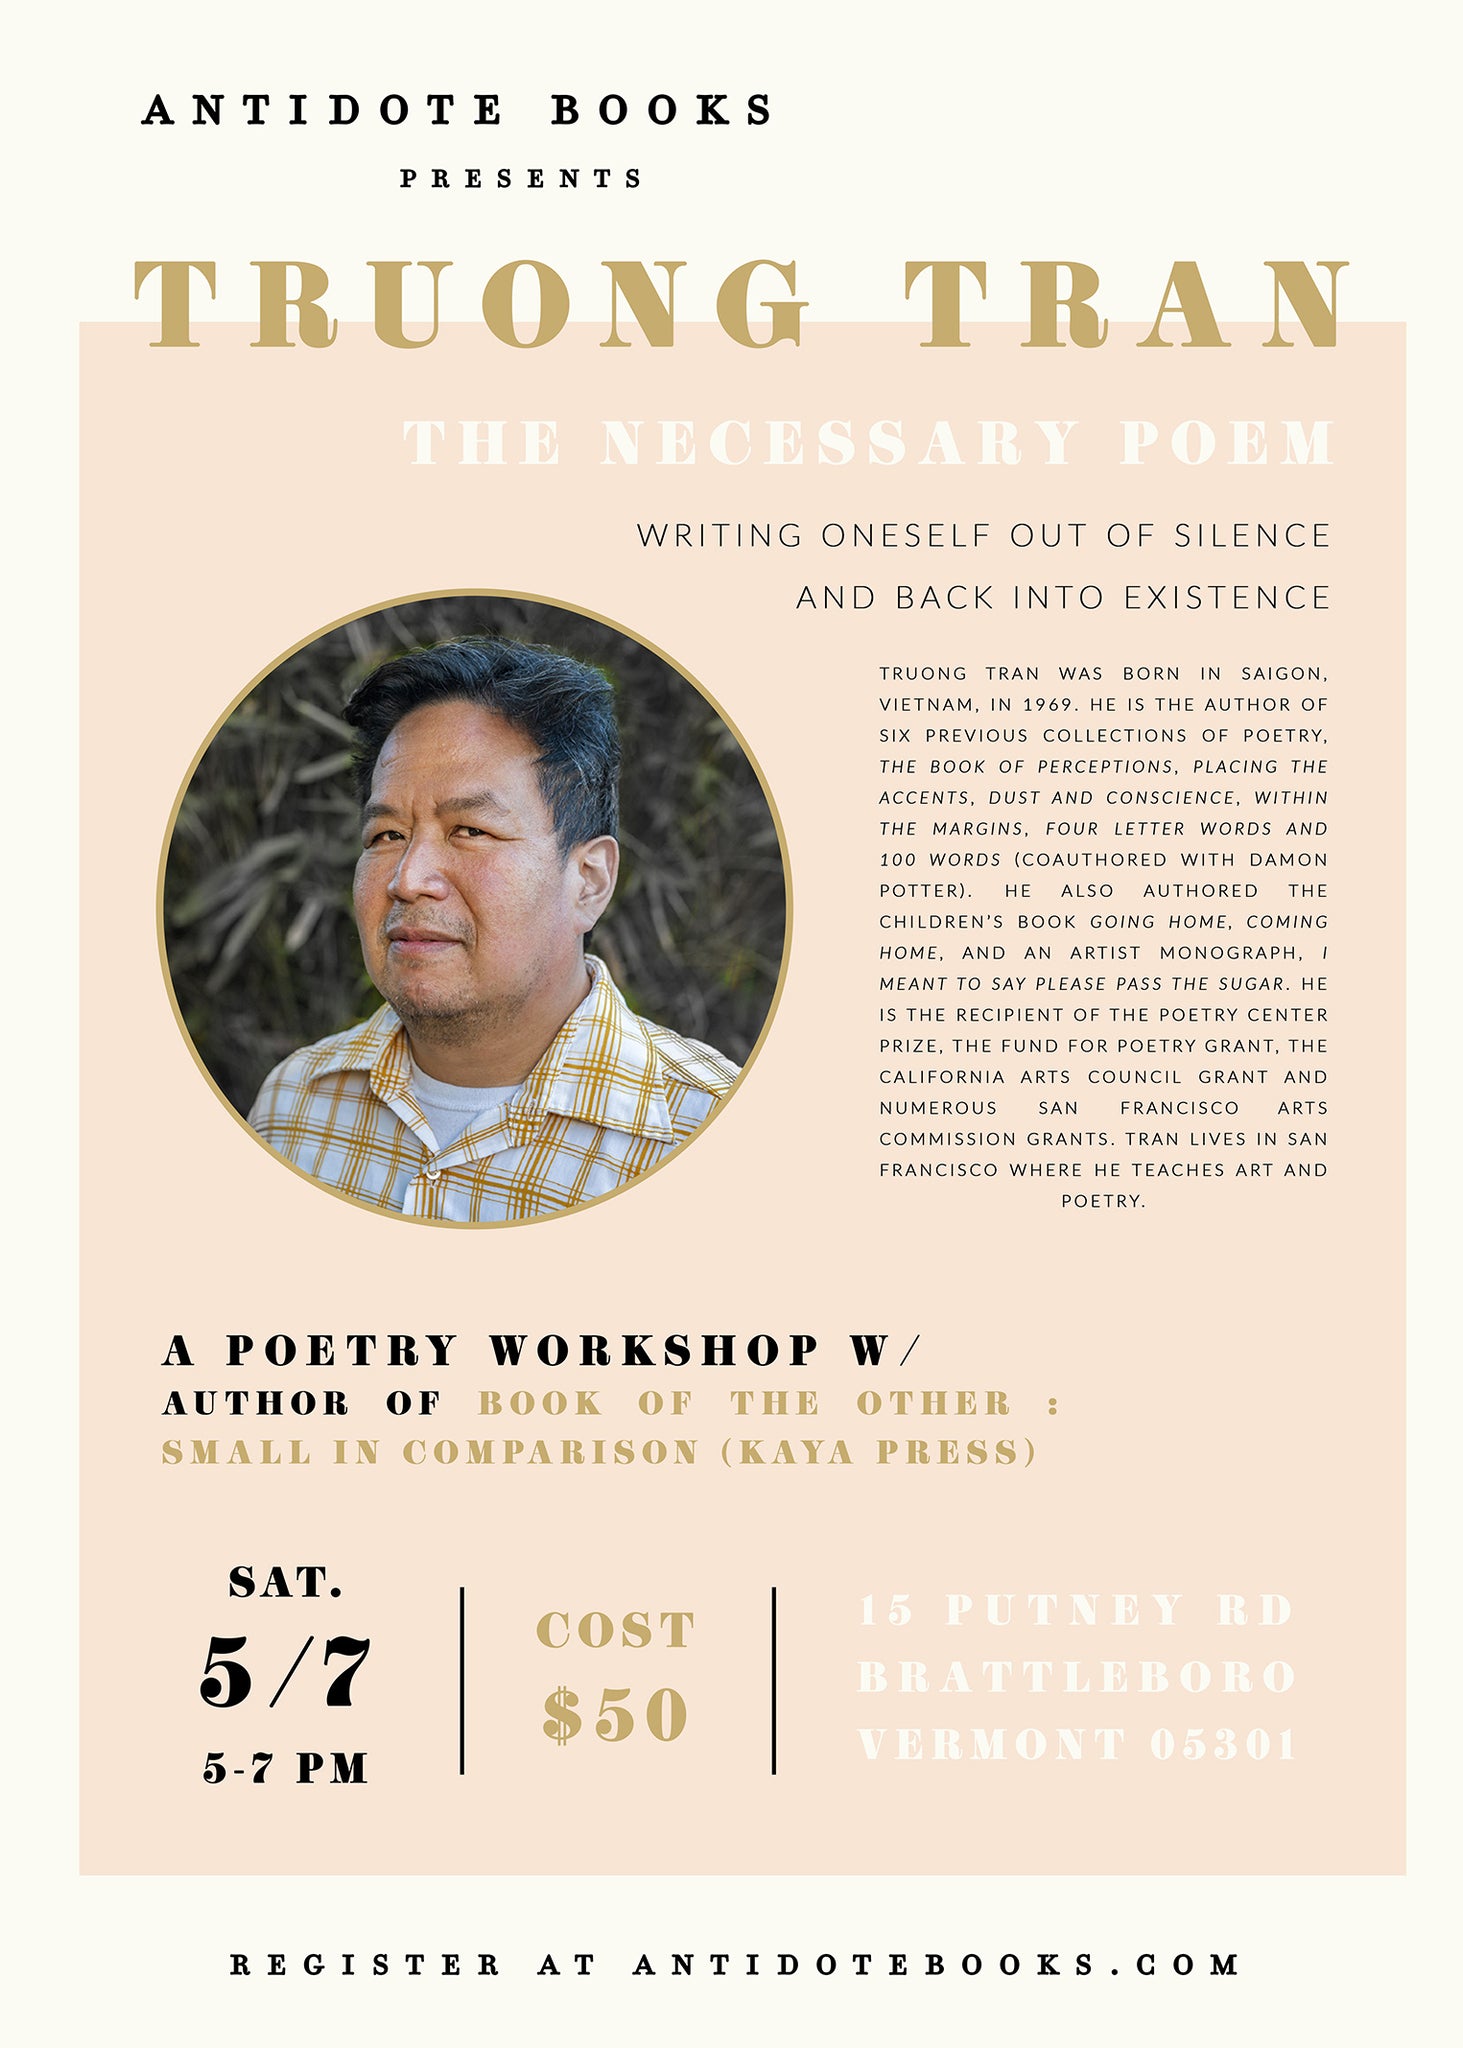 Truong Tran — The Necessary Poem: Writing Oneself Out of Silence and Into Existence